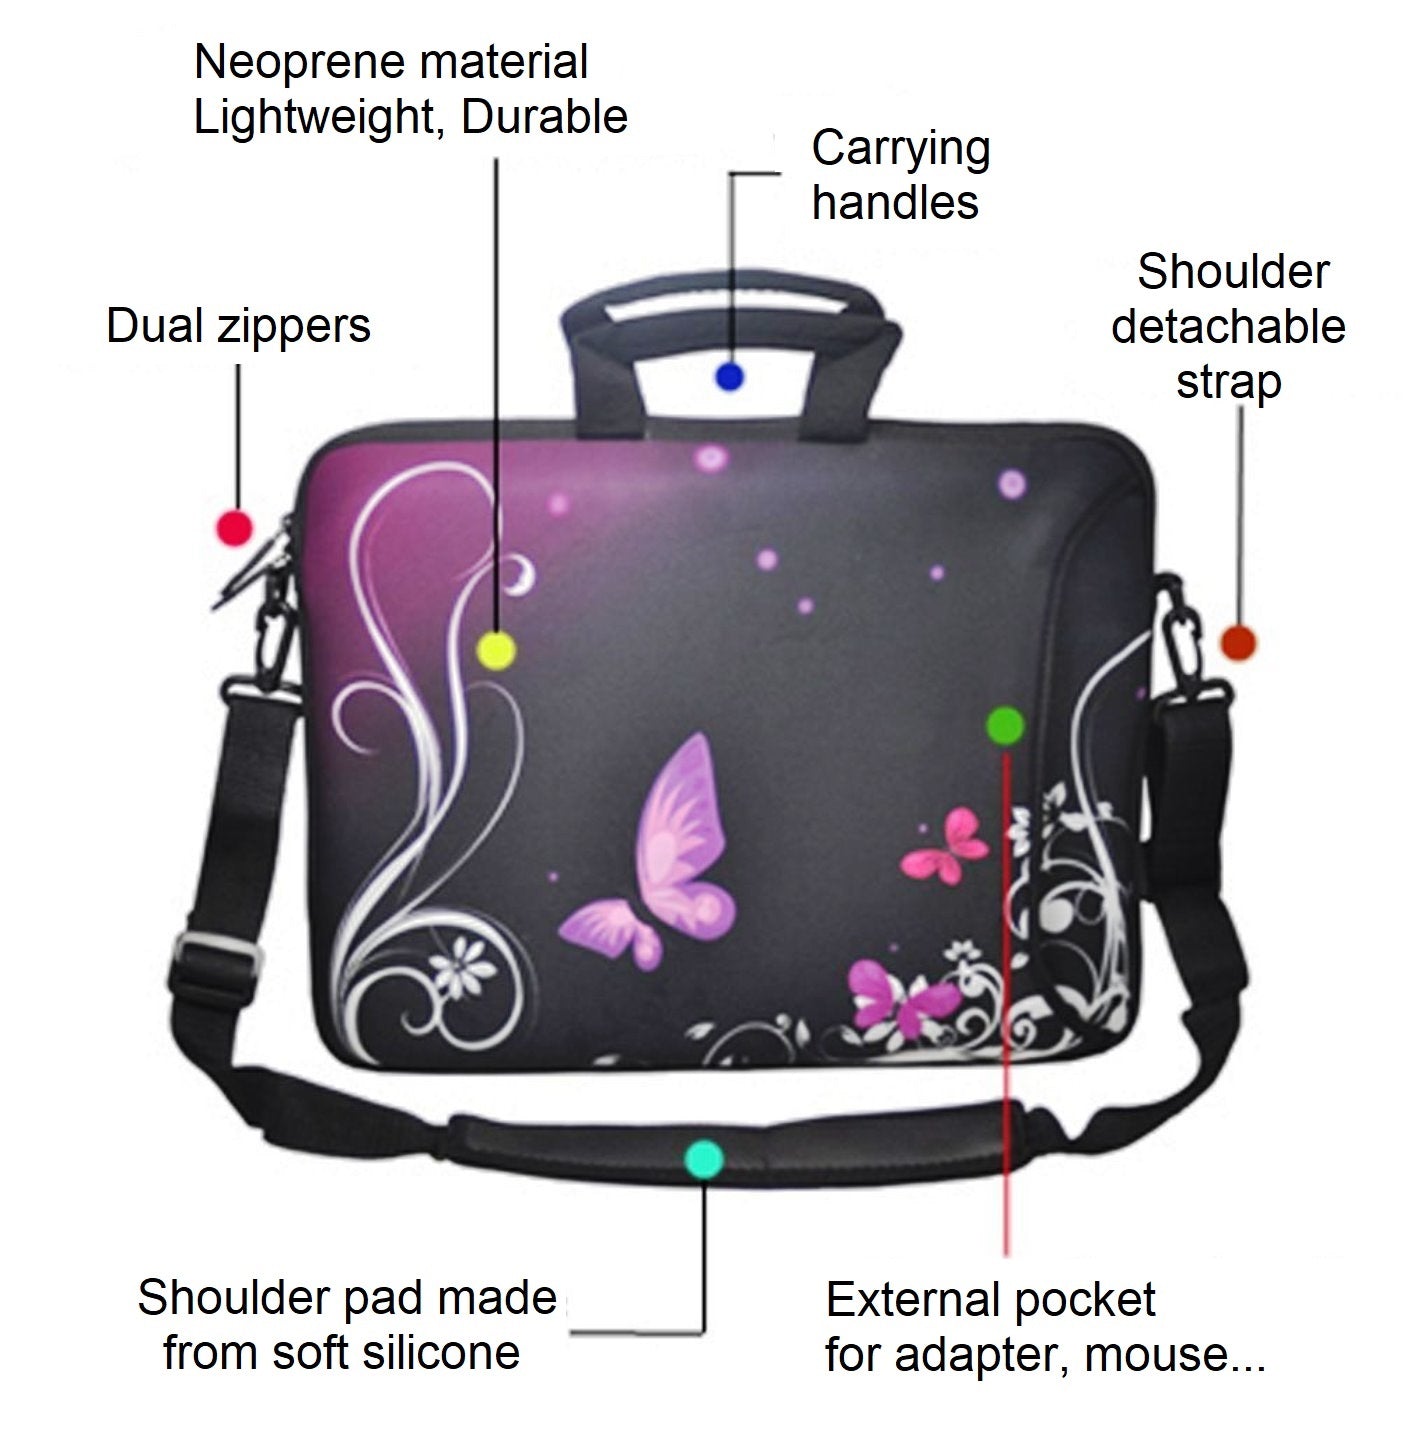 17"- 17.3" (inch) LAPTOP BAG/CASE WITH HANDLE & STRAP, NEOPRENE MADE FOR LAPTOPS/NOTEBOOKS, ZIPPED*FLOWER & BUTTERFLIES*